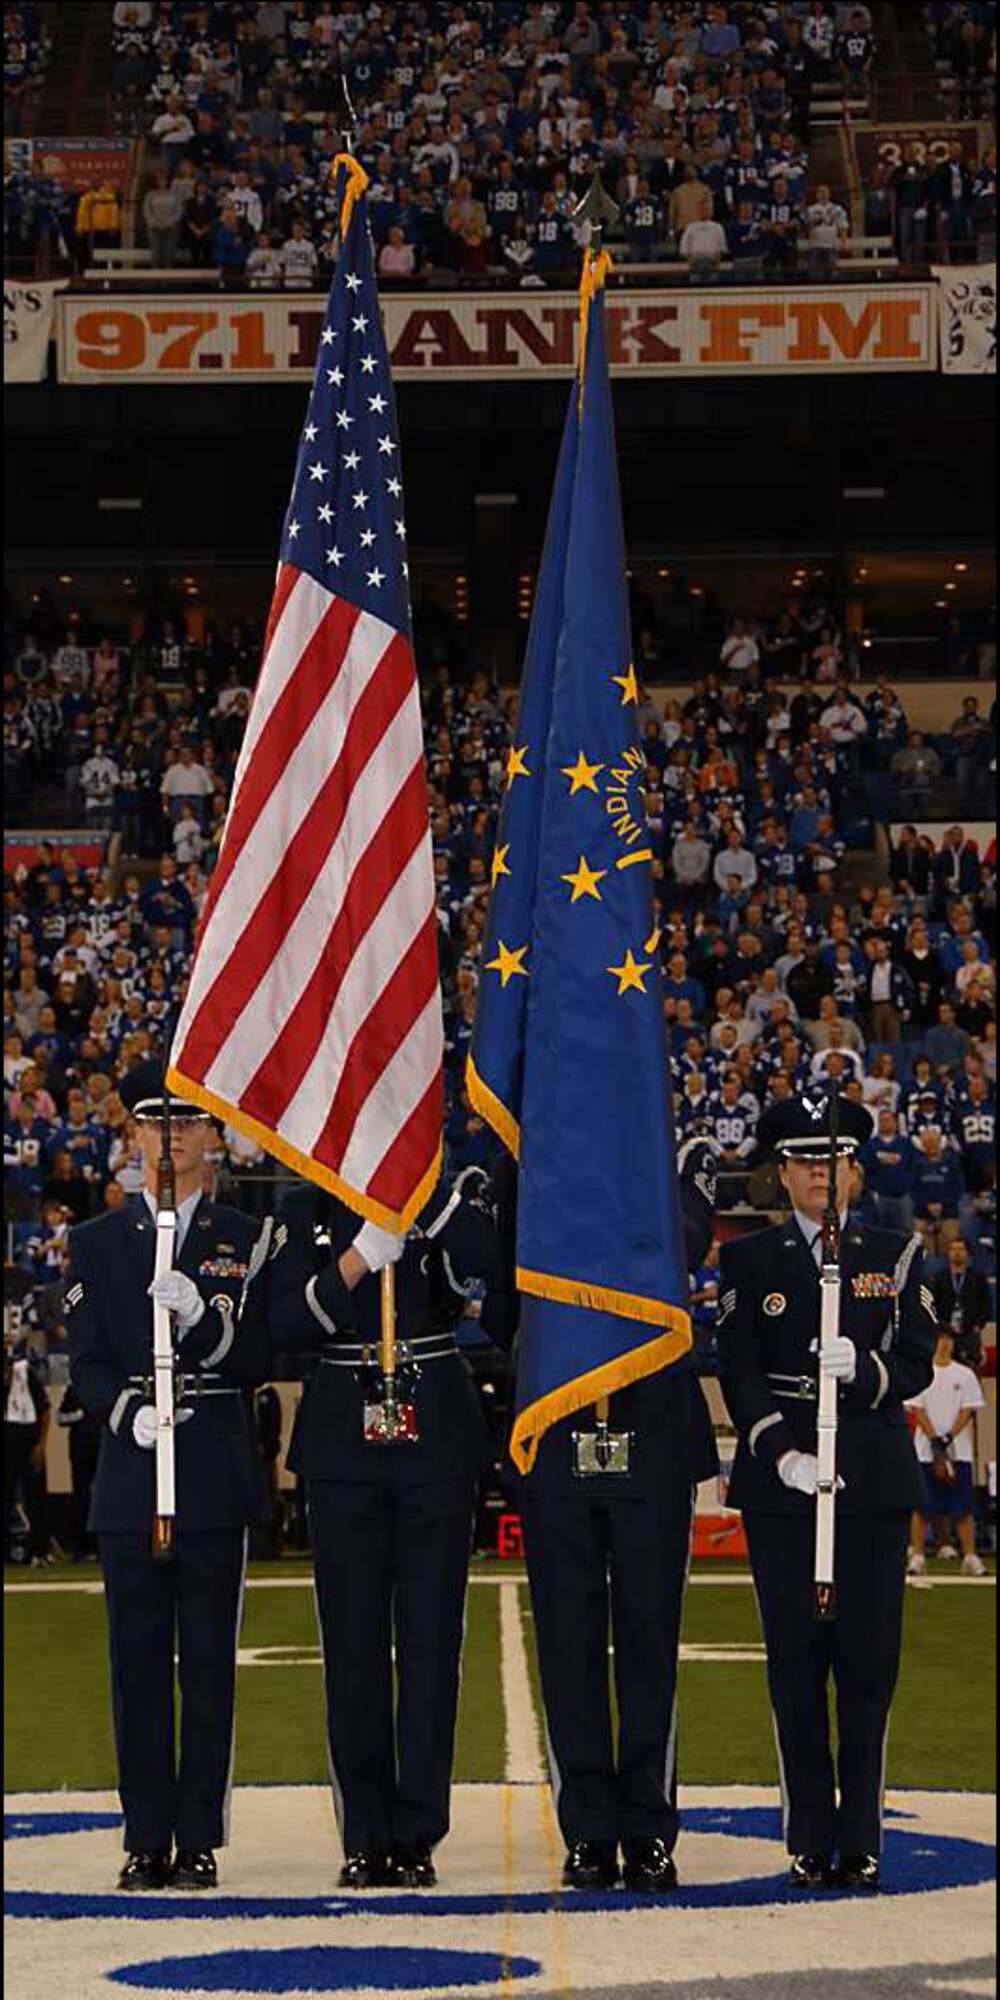 On Sunday Dec. 2, 181st Honor Guard marched onto the 50-yard line at the RCA Dome to display the nation’s flag before the Indianapolis Colts game against the Jacksonville Jaguars. (Photo by TSgt Michael Kellams)